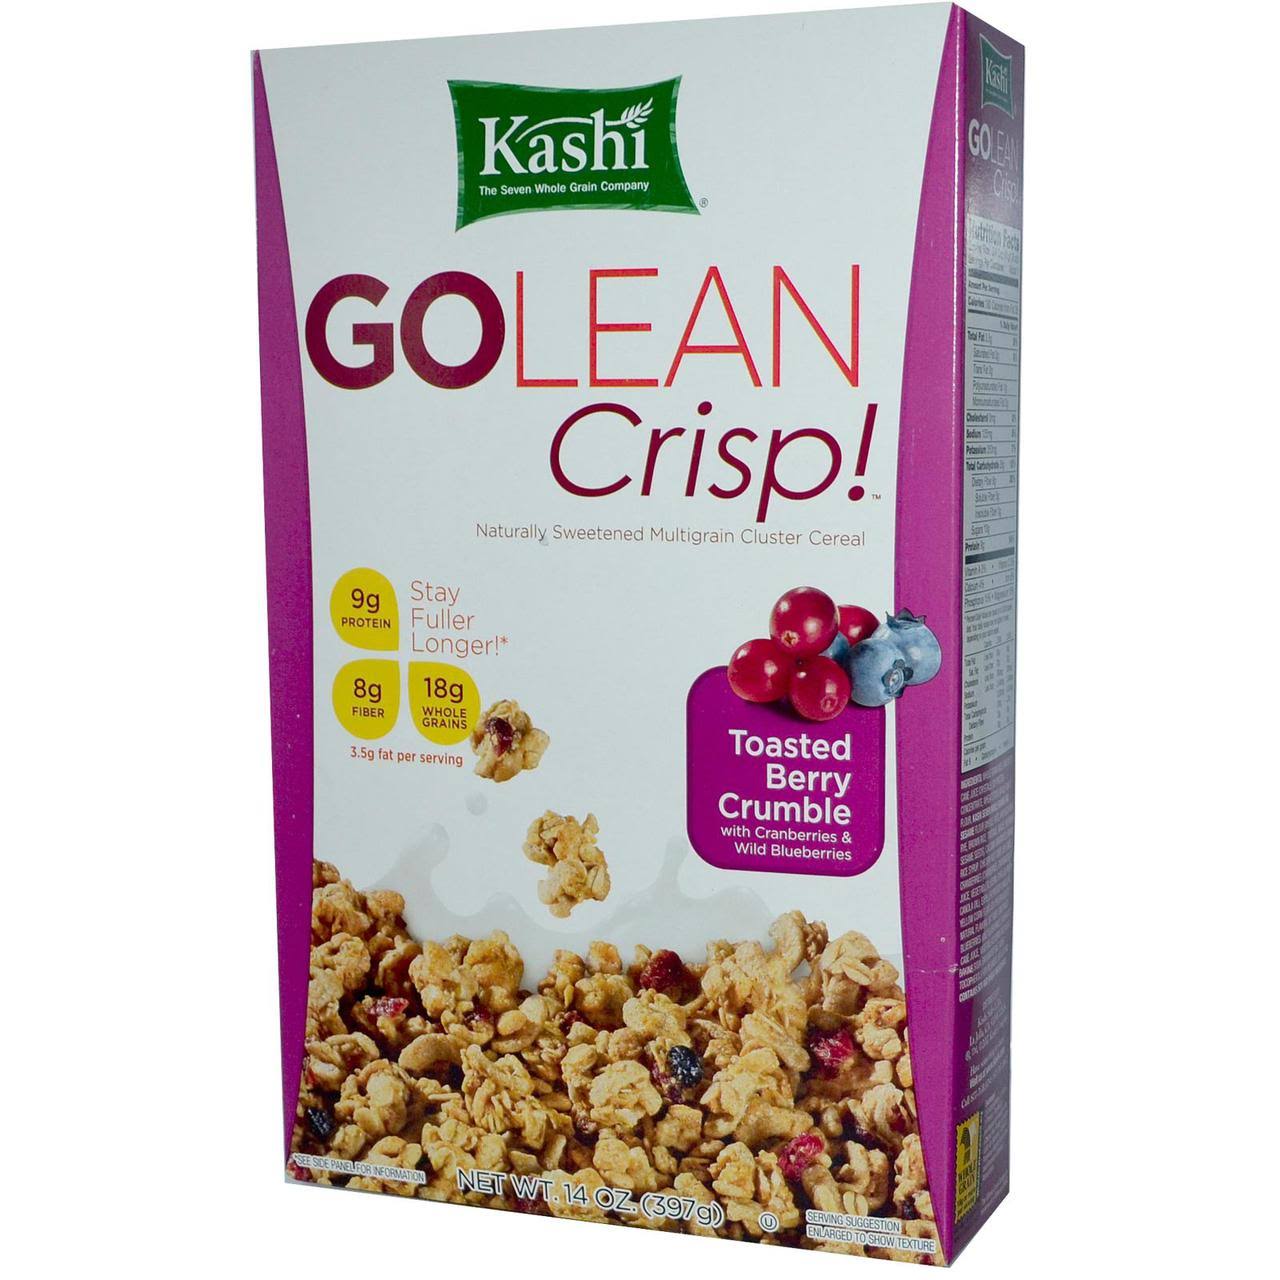 Kashi Golean Crisp! Cereal - Toasted Berry Crumble, 14oz